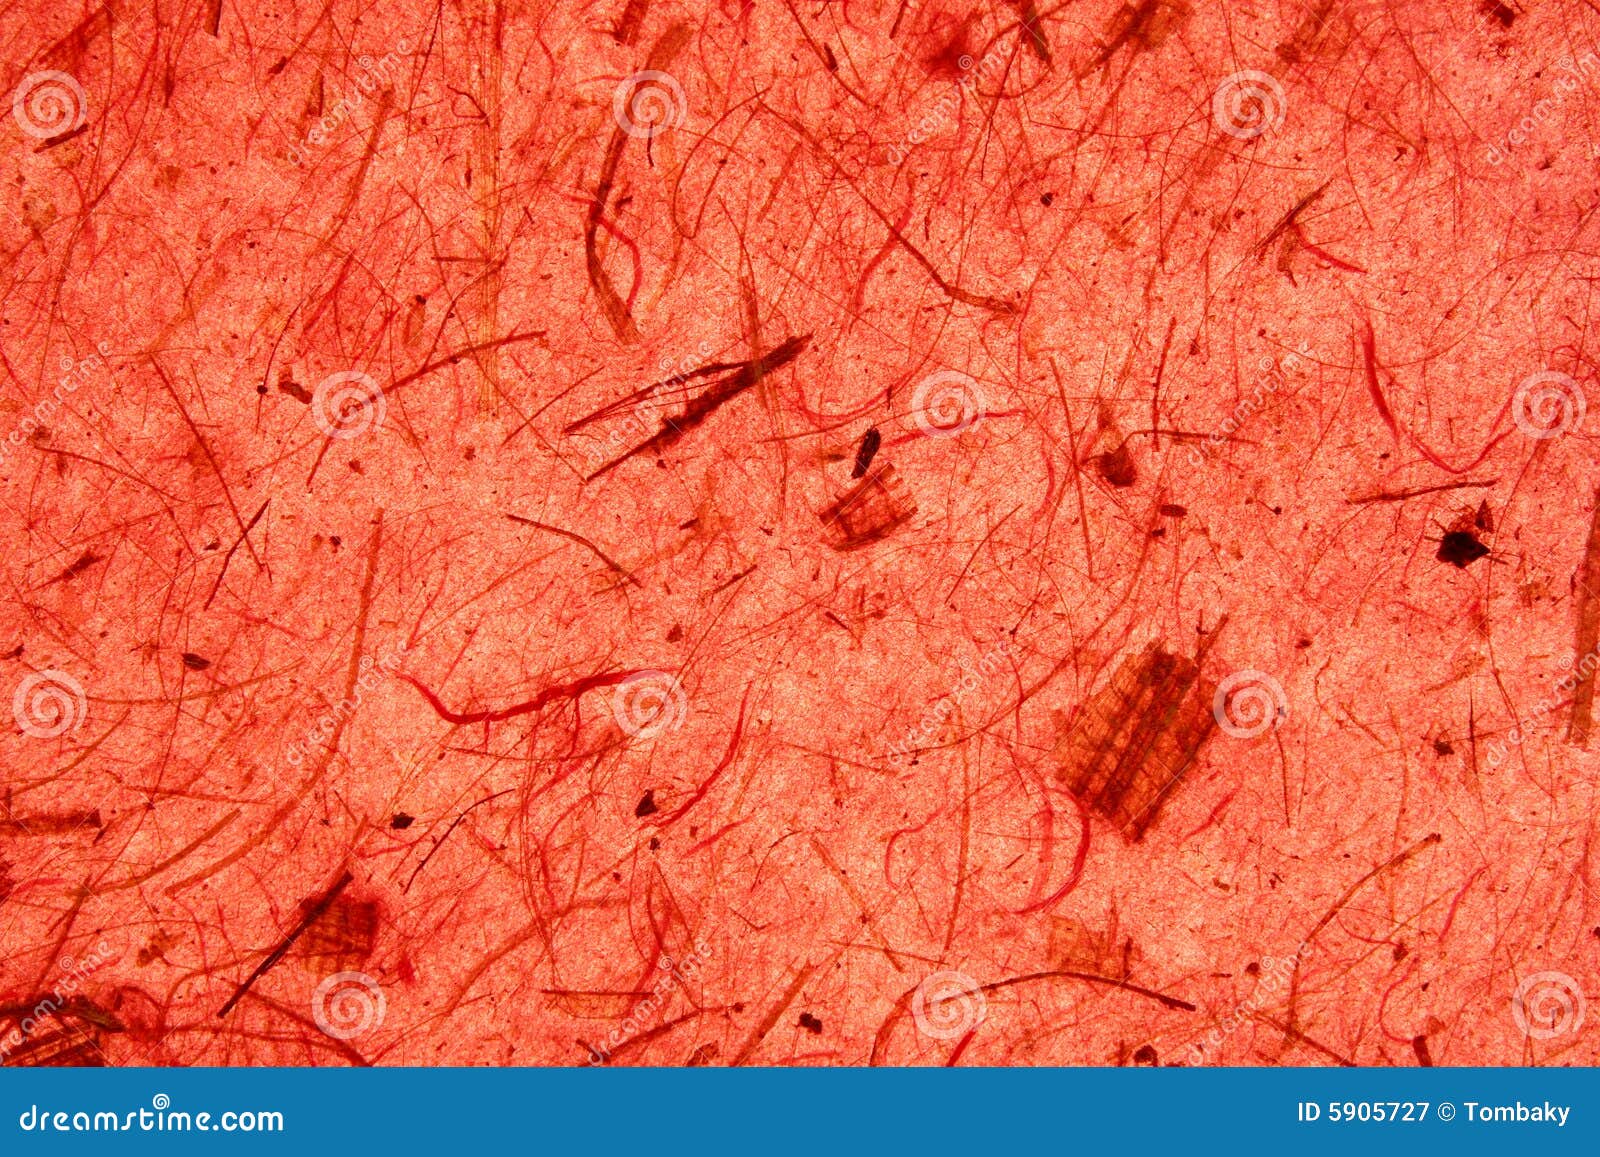 Crumpled Red Paper Texture Picture, Free Photograph